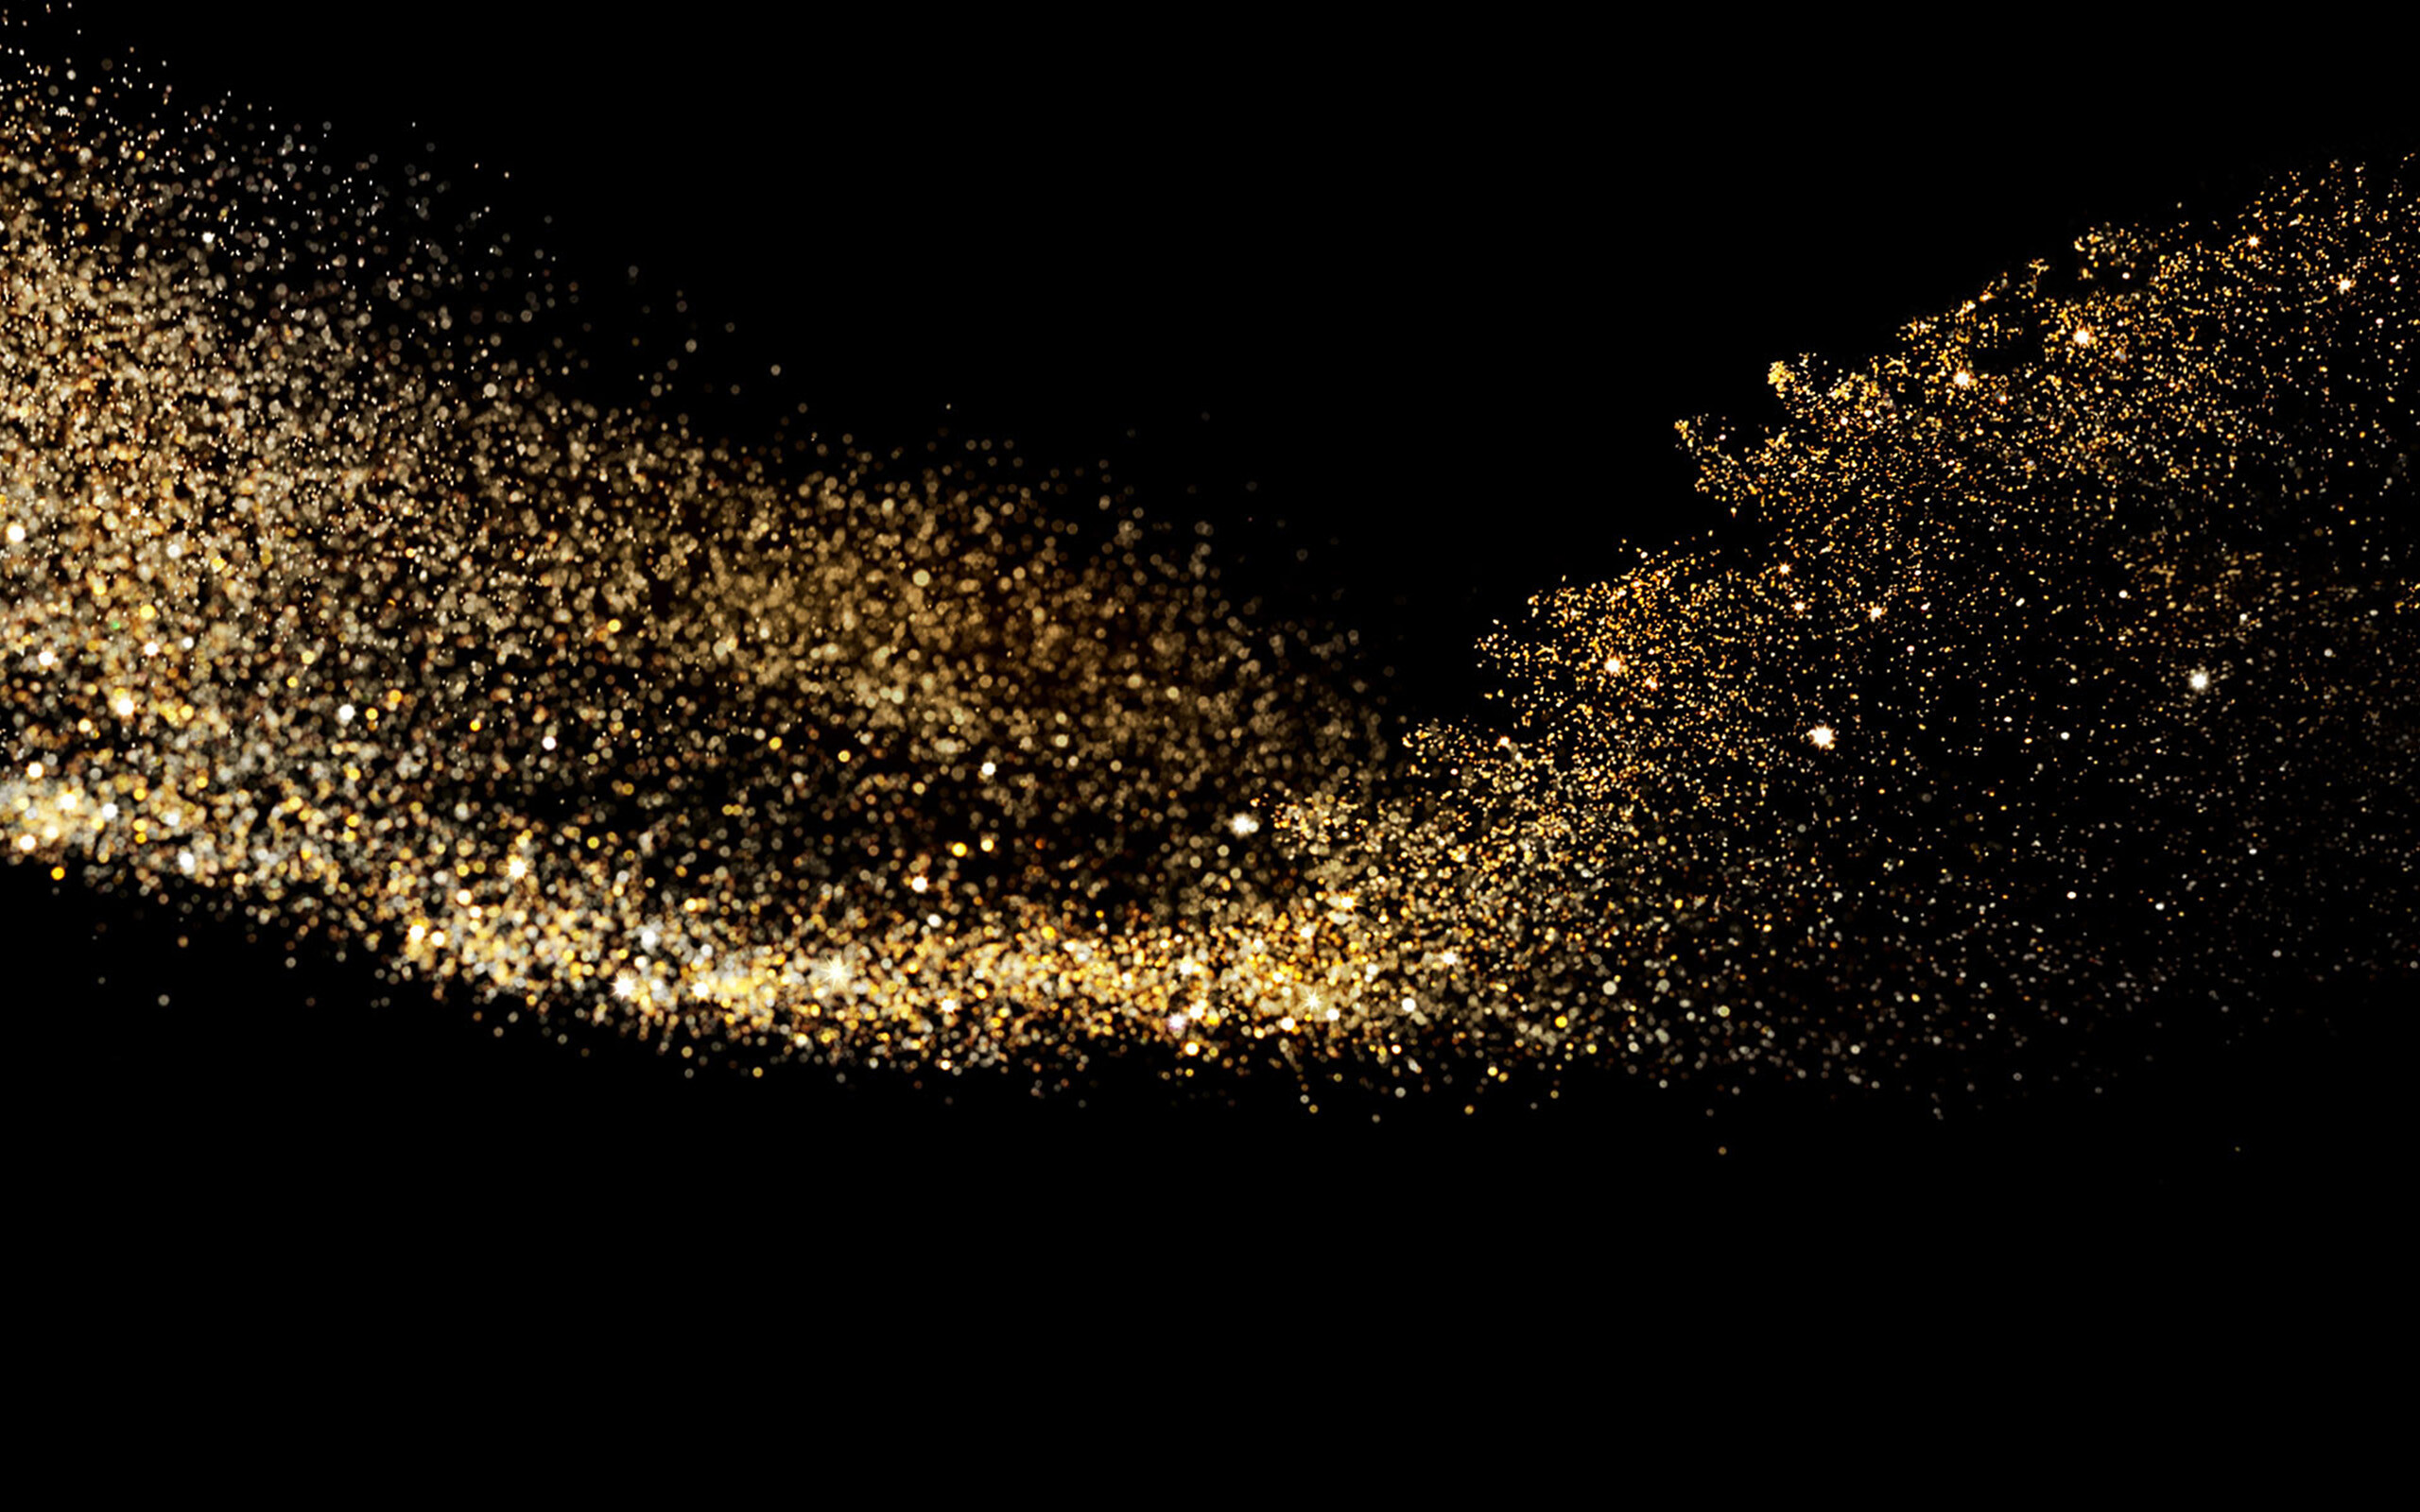 Gold Glitter: Golden sparks, The golden sand - decoration powder used in jewelry. 2560x1600 HD Wallpaper.